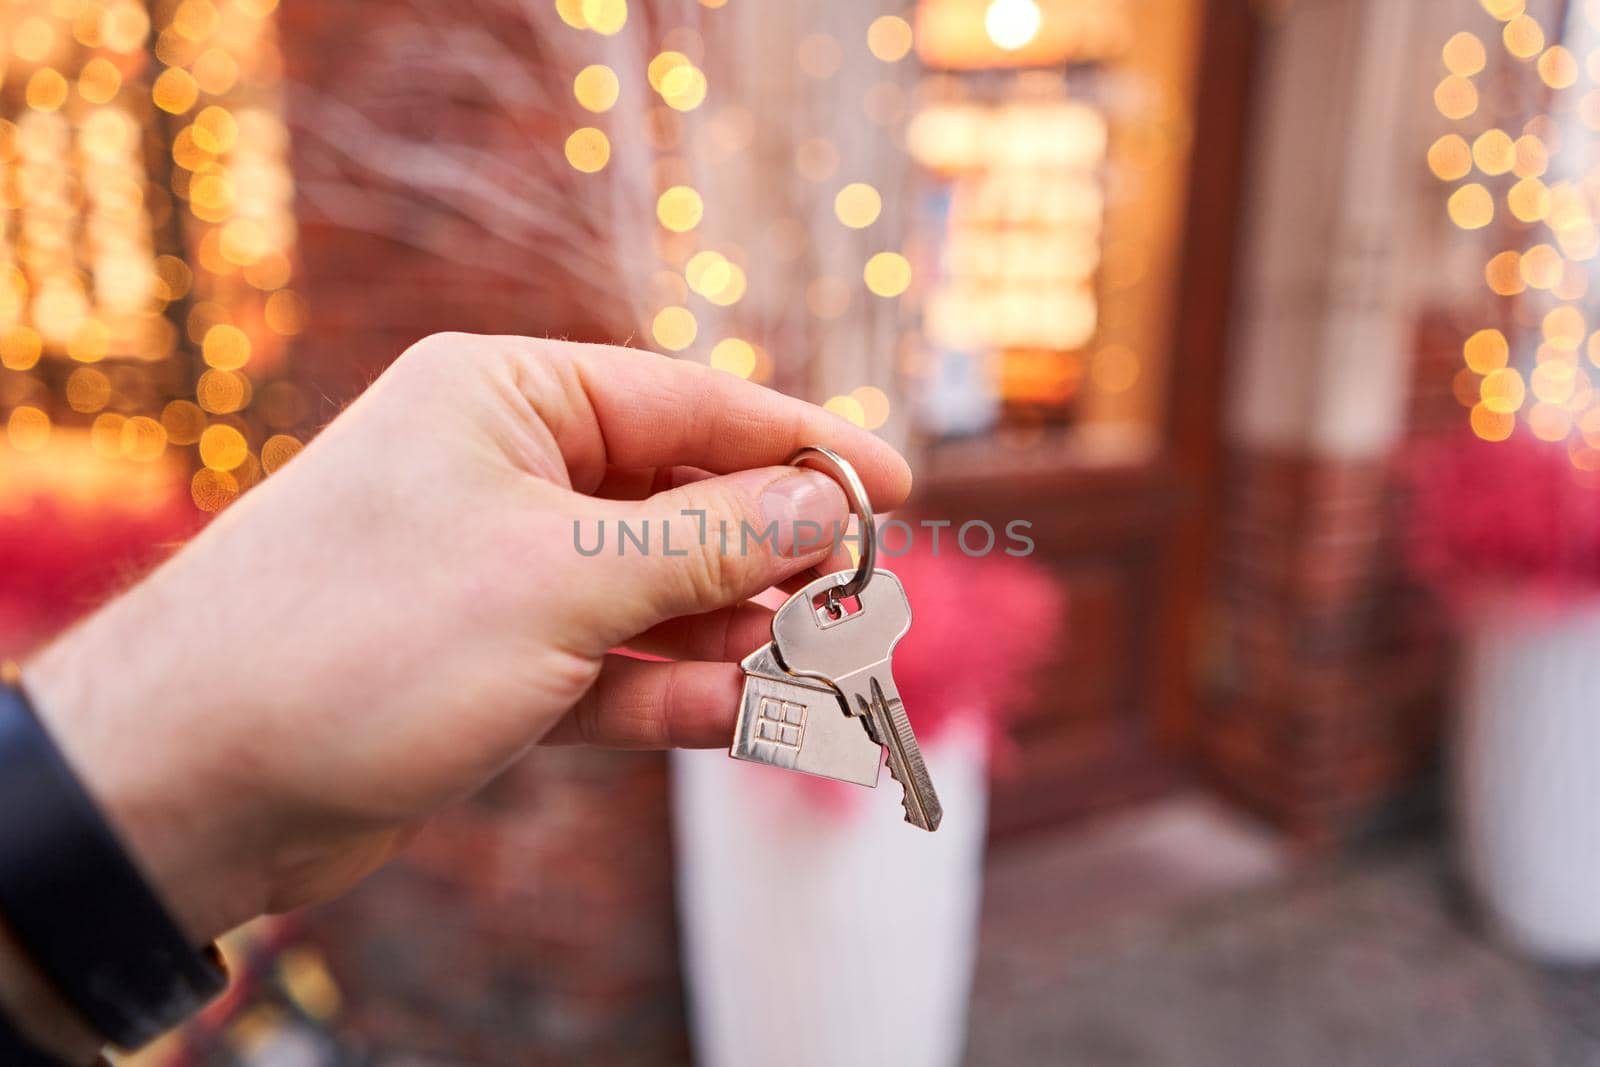 Rent a house for Christmas. Mortgage or rent concept. Man holding key with wooden house keychain . Real estate, hypothec, moving home or renting property. Christmas mood in blurred background. by Malkovkosta